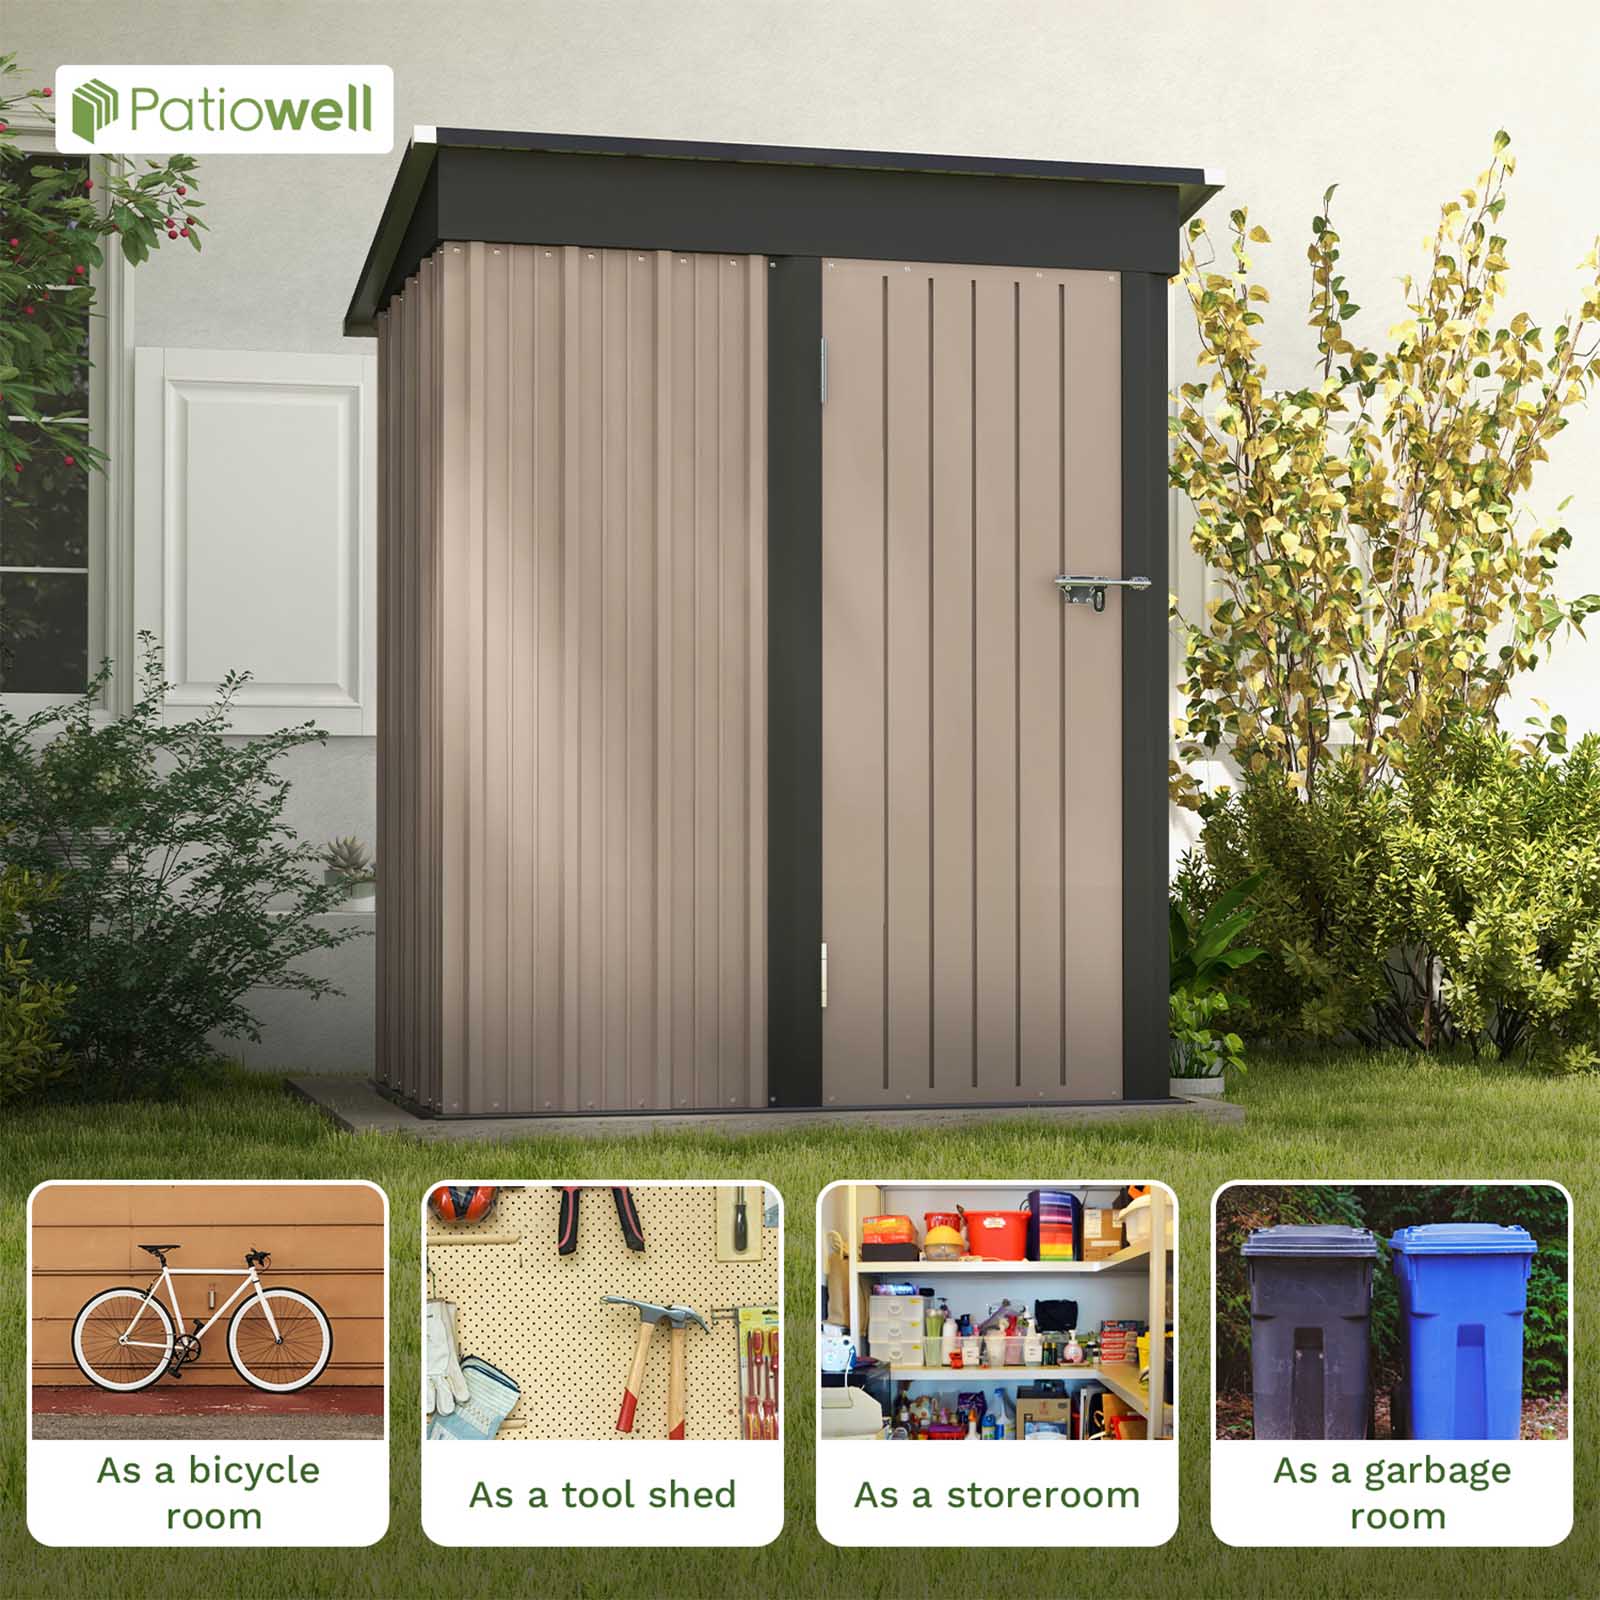 4 ft. 5 in. W x 2 ft. D Garbage Shed